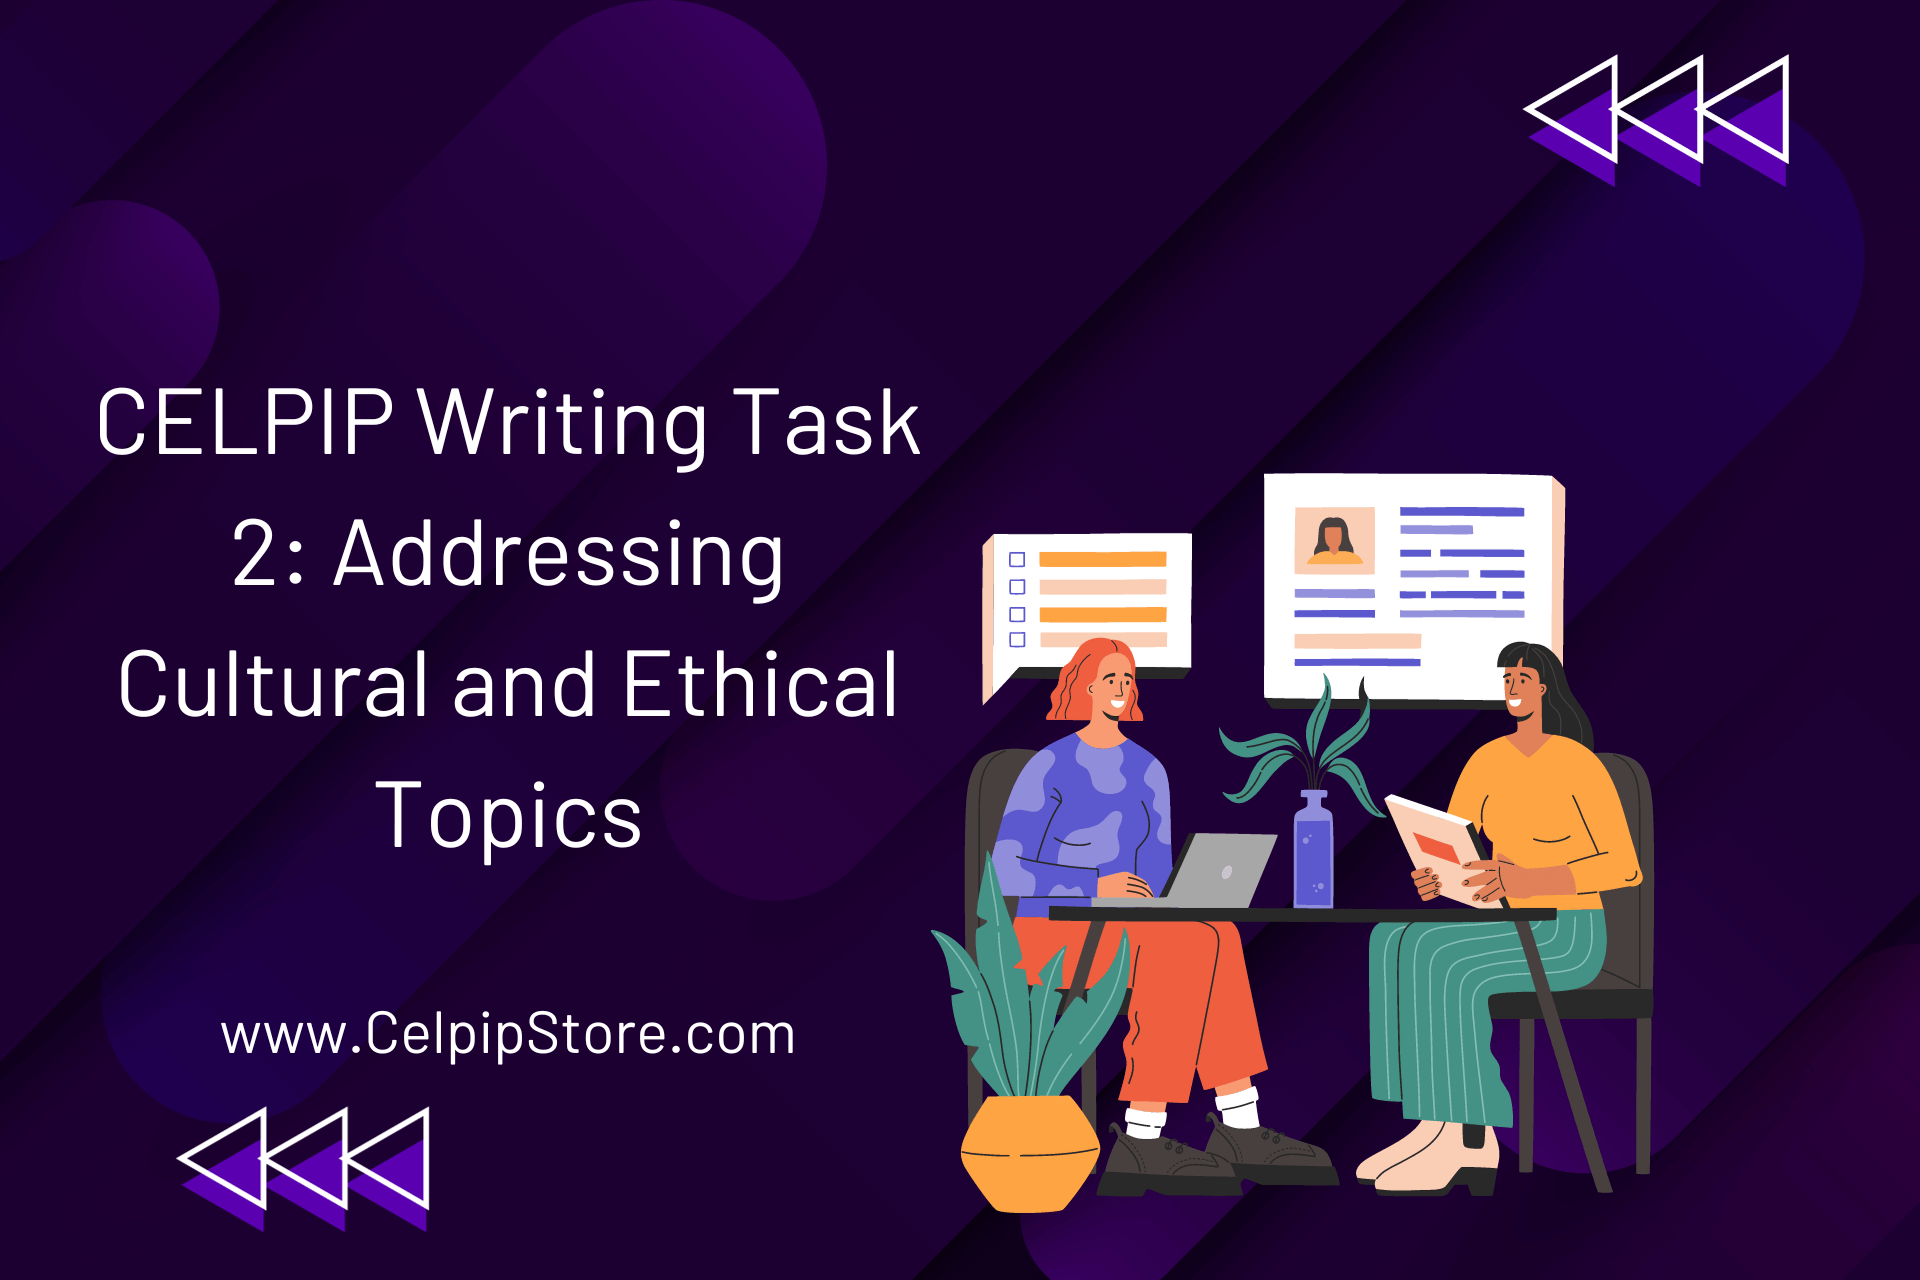 CELPIP Writing Task 2: Addressing Cultural and Ethical Topics